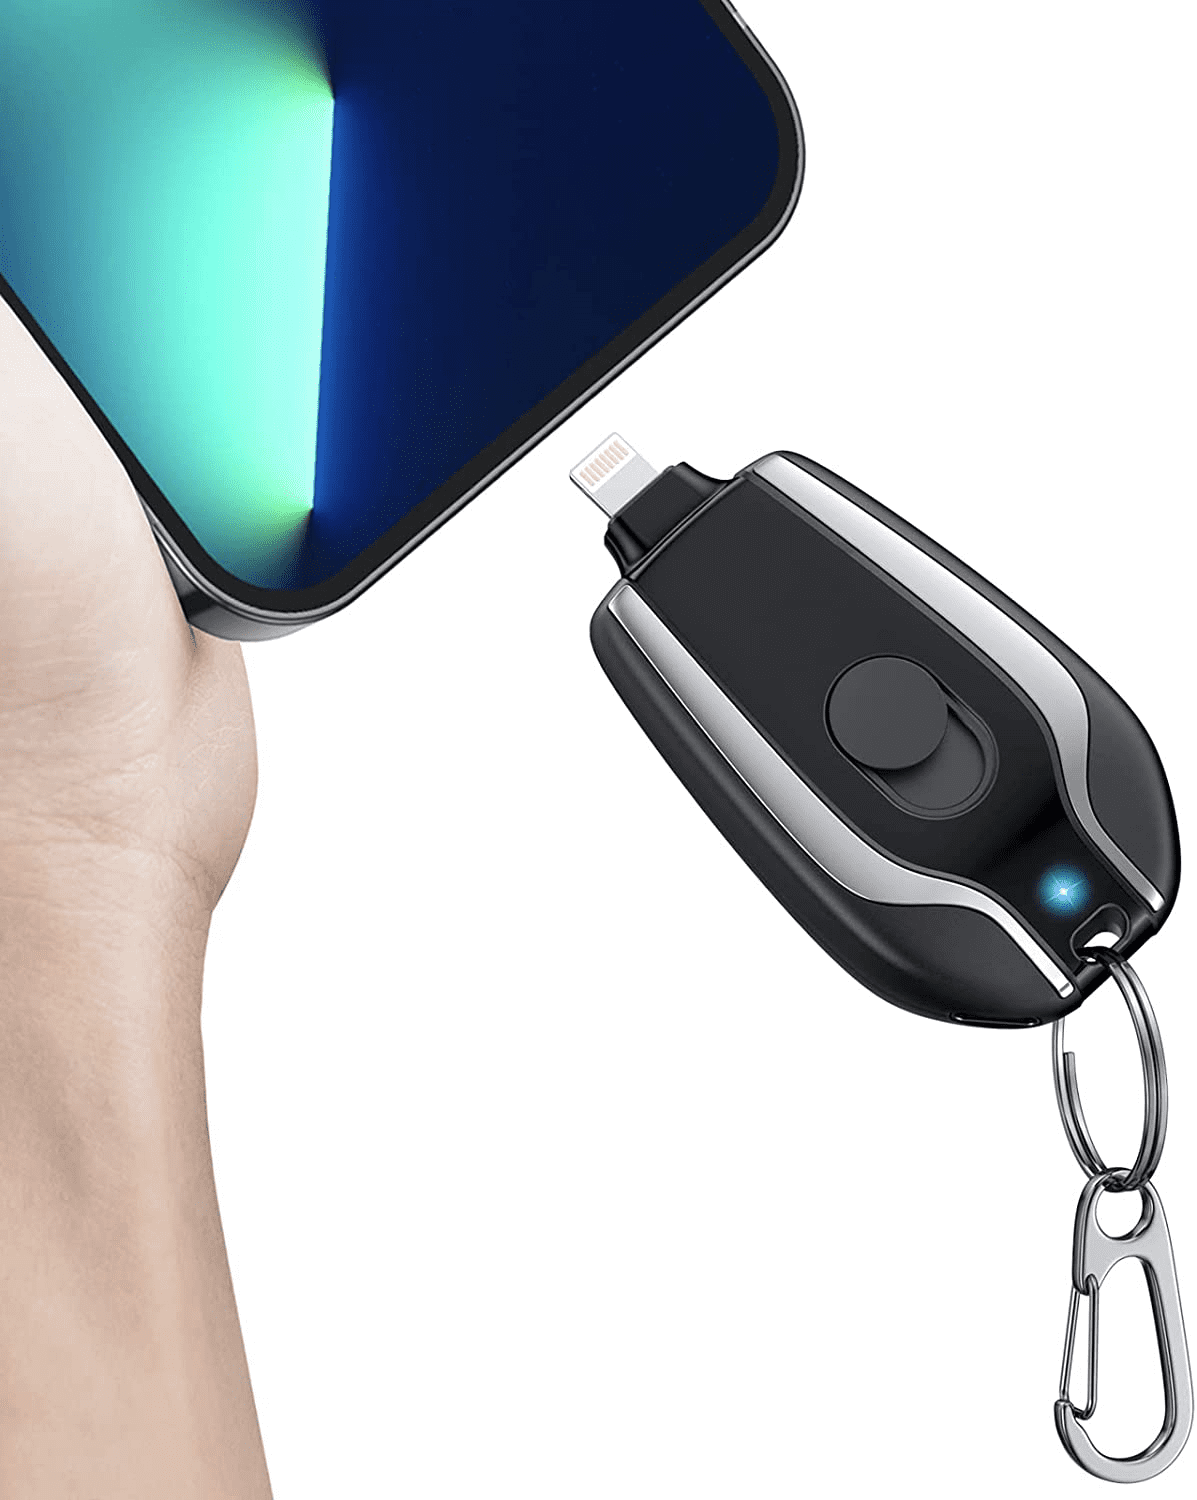 Keychain Portable Charger for iPhone, 1500mAh Mini Power Emergency Pod,  Ultra-Compact External Fast Charging Power Bank Battery Pack, Key Ring Cell Phone  Charger, Charger Smaller Than a Card 